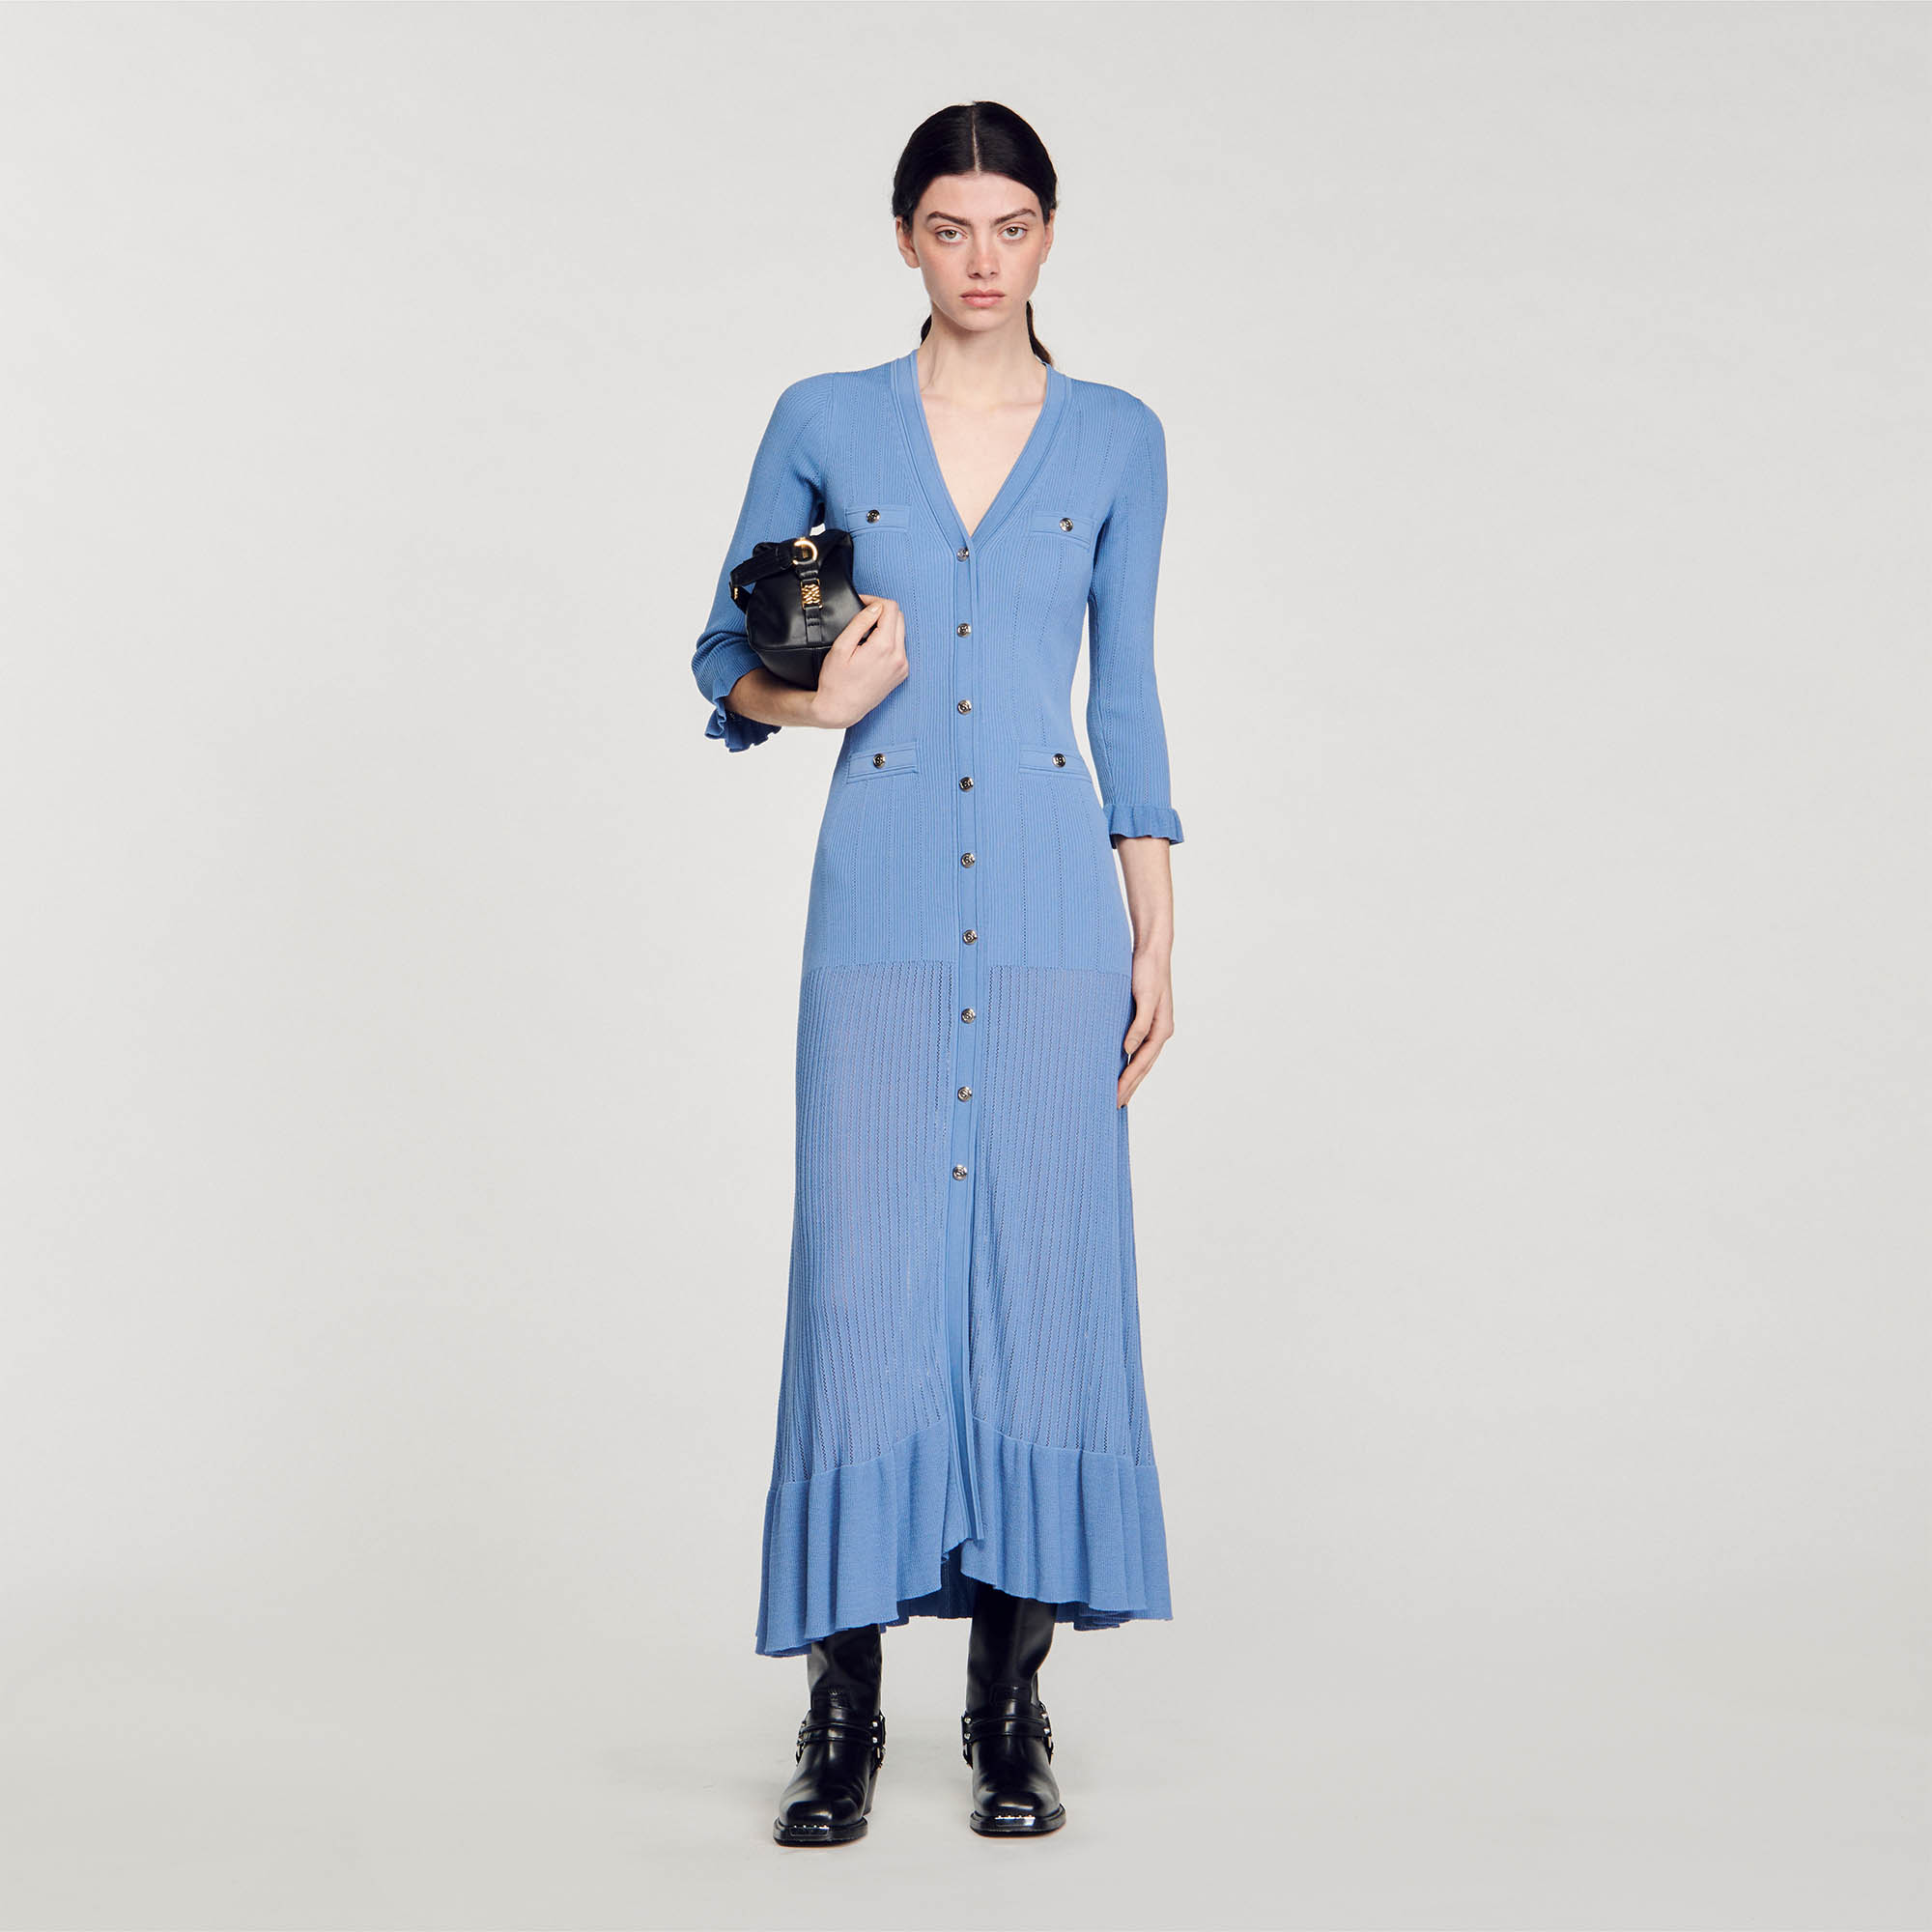 Sandro viscose Long knitted dress with long sleeves, ruffled cuffs, a V-neck, gold buttons, and a ruffle on the hem